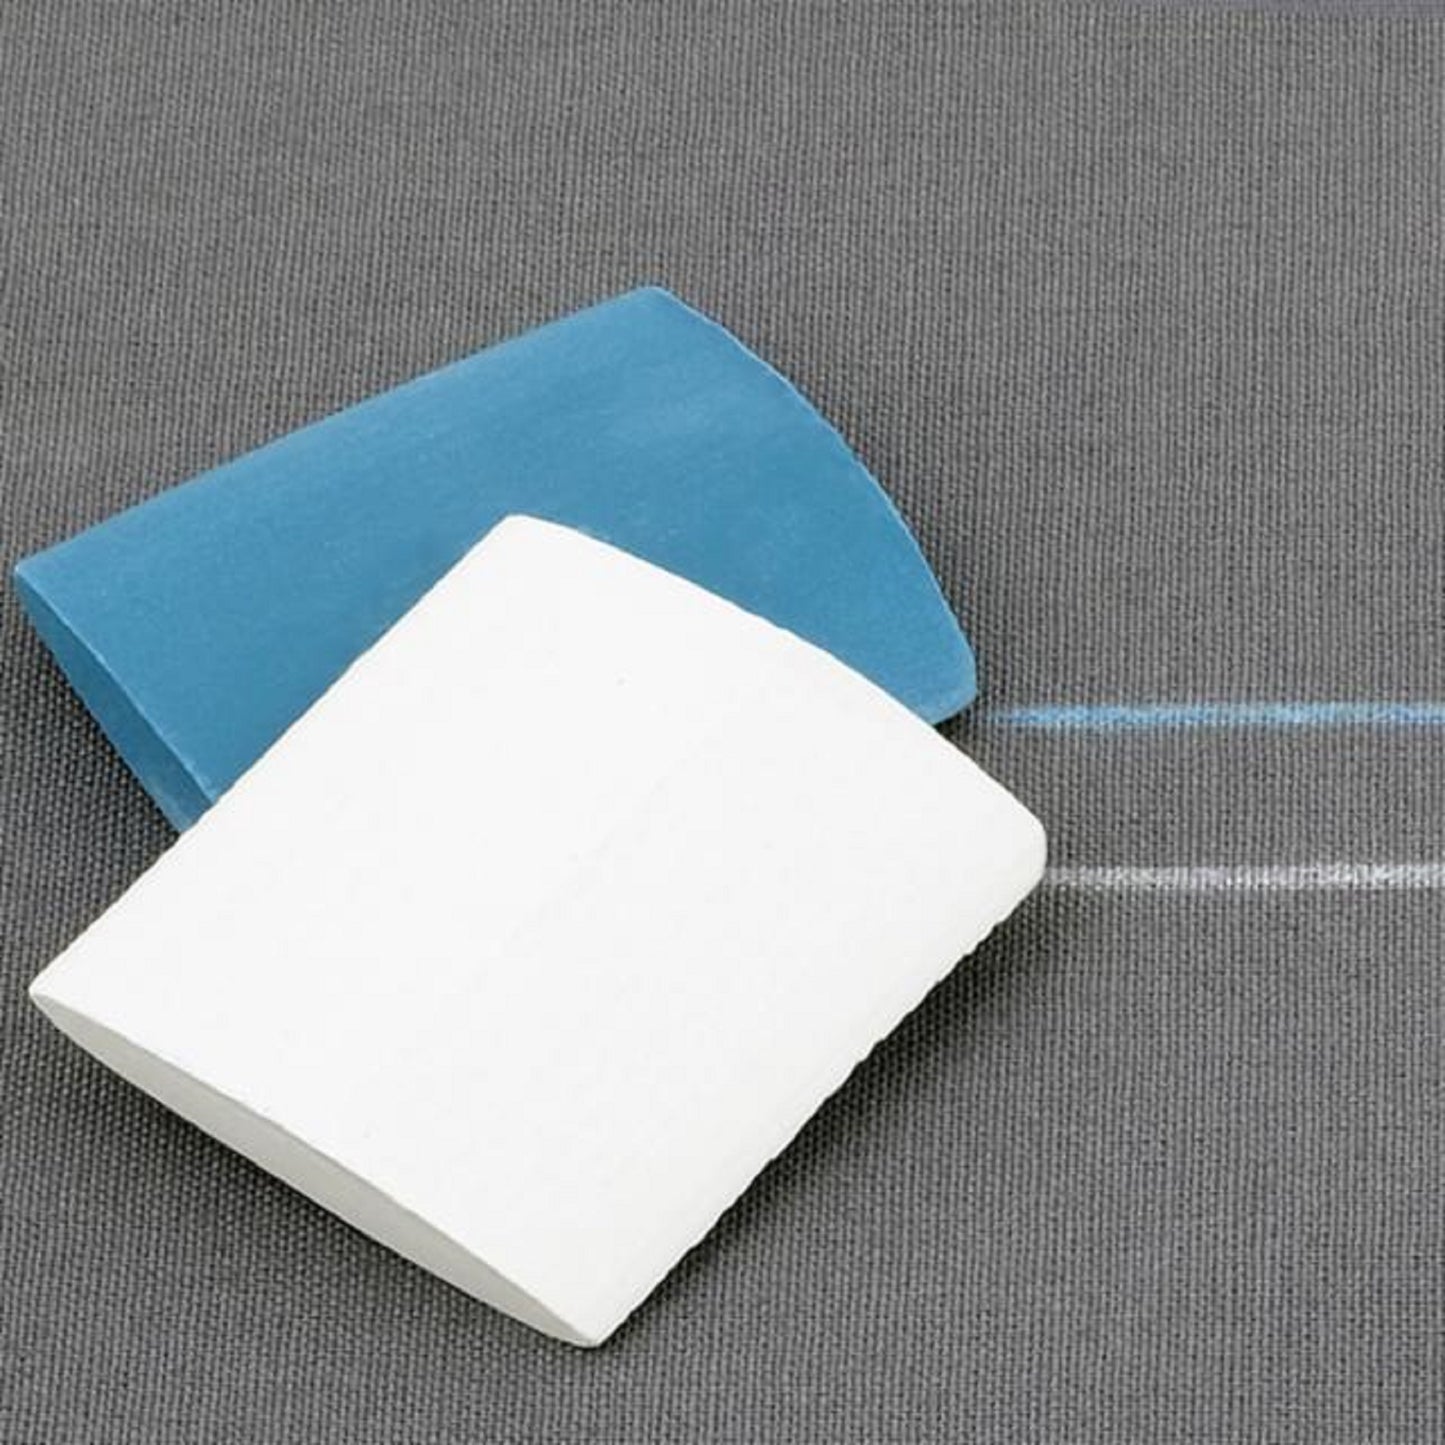 Dritz Tailor's Chalk-Blue and White for Marking